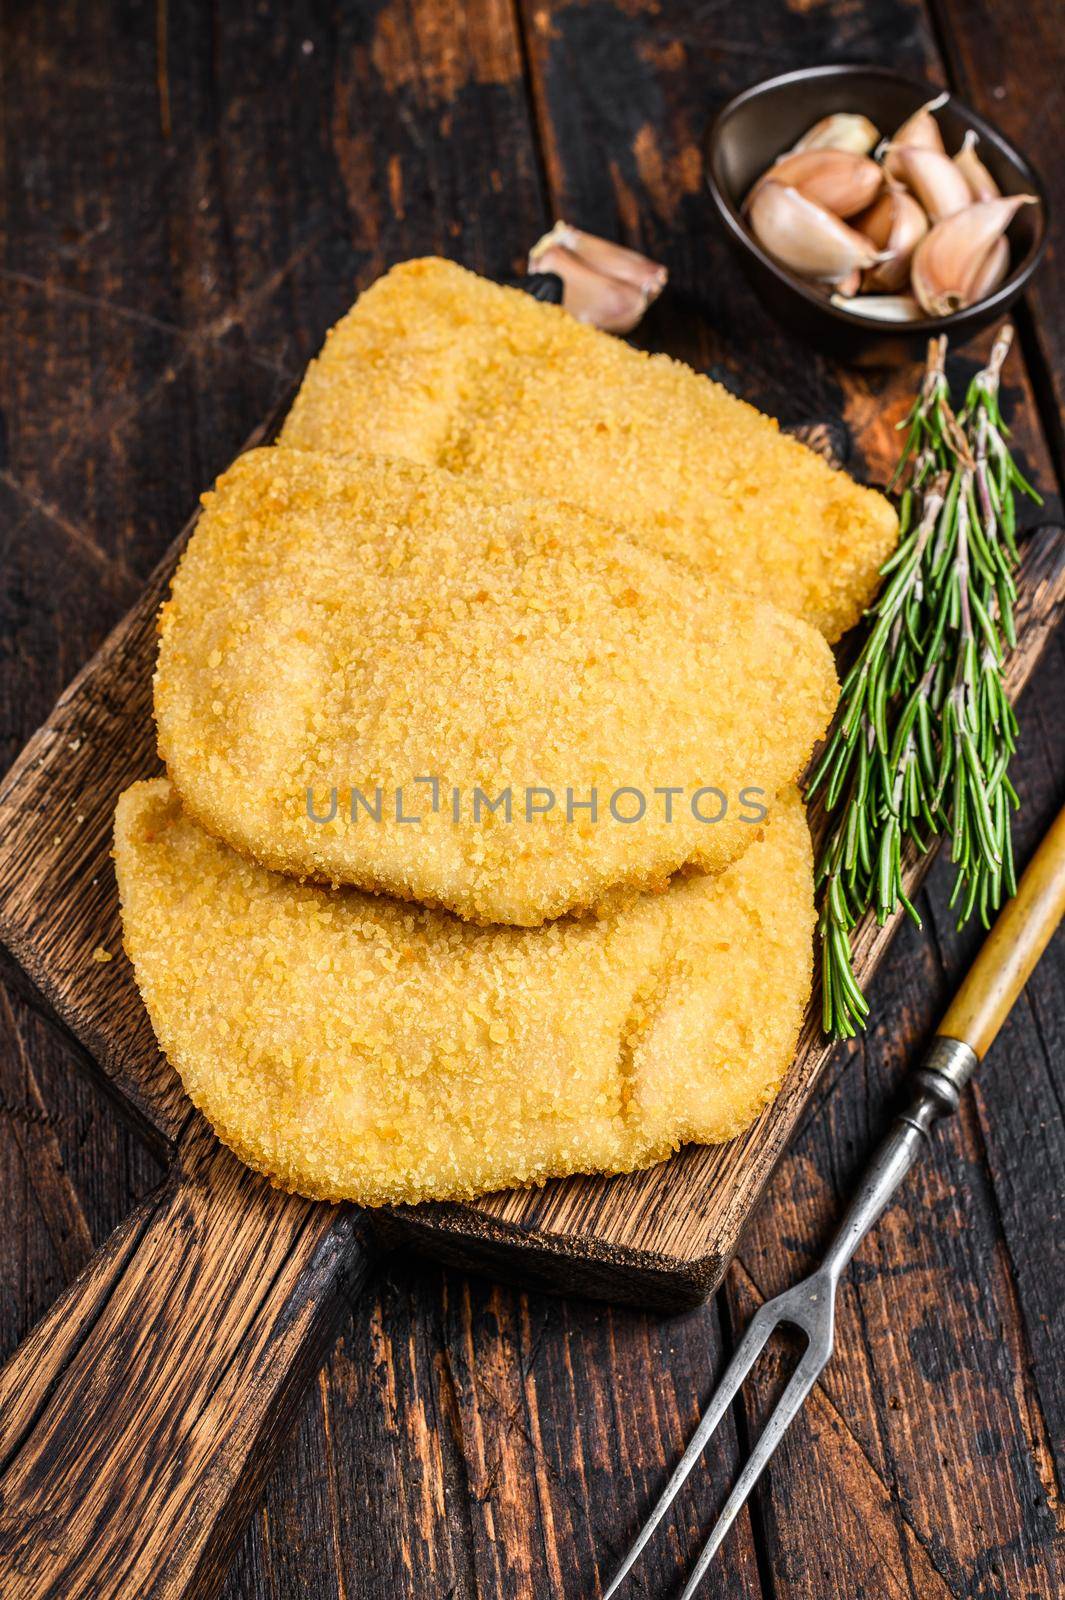 Raw chicken cordon bleu meat cutlets with bread crumbs on a wooden board. Dark wooden background. Top view by Composter